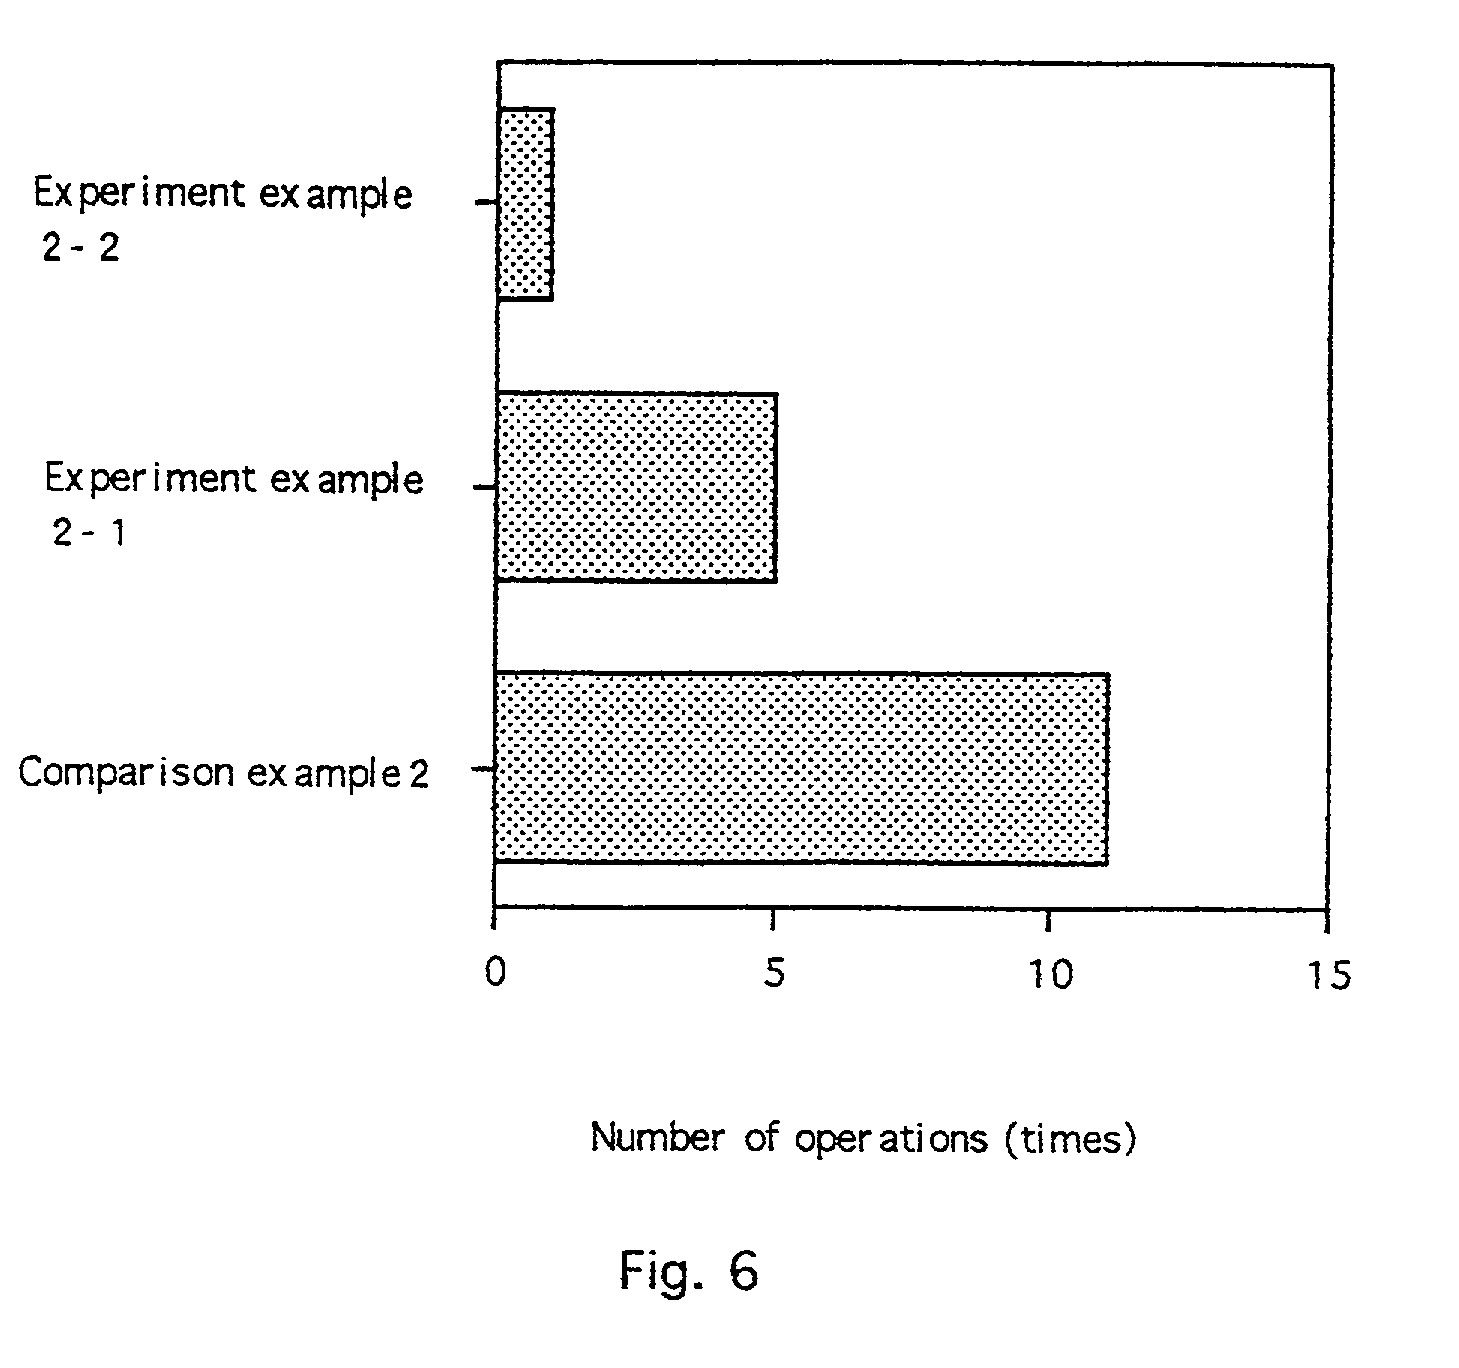 Apparatus and method for in vivo delivery of therapeutic agents